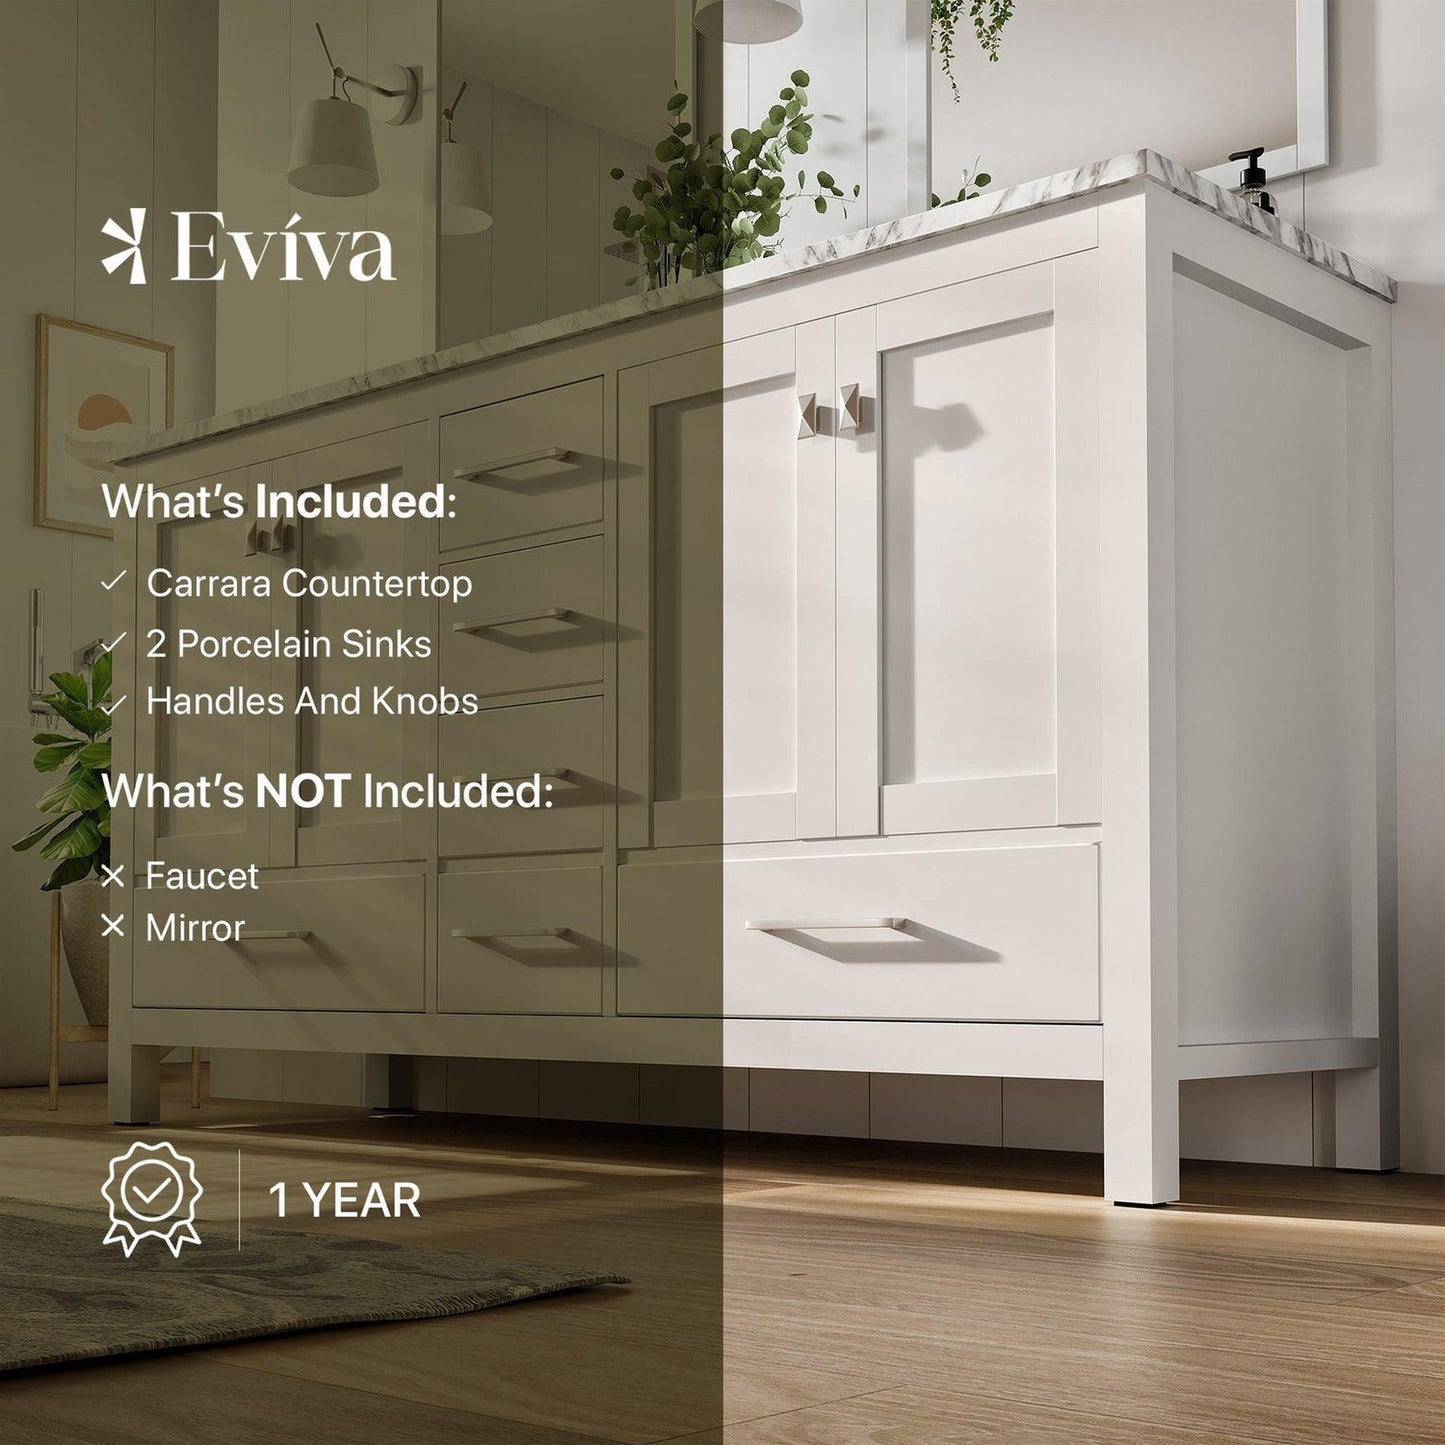 Eviva London 60" x 34" White Freestanding Bathroom Vanity With Carrara Marble Countertop and Double Undermount Sink